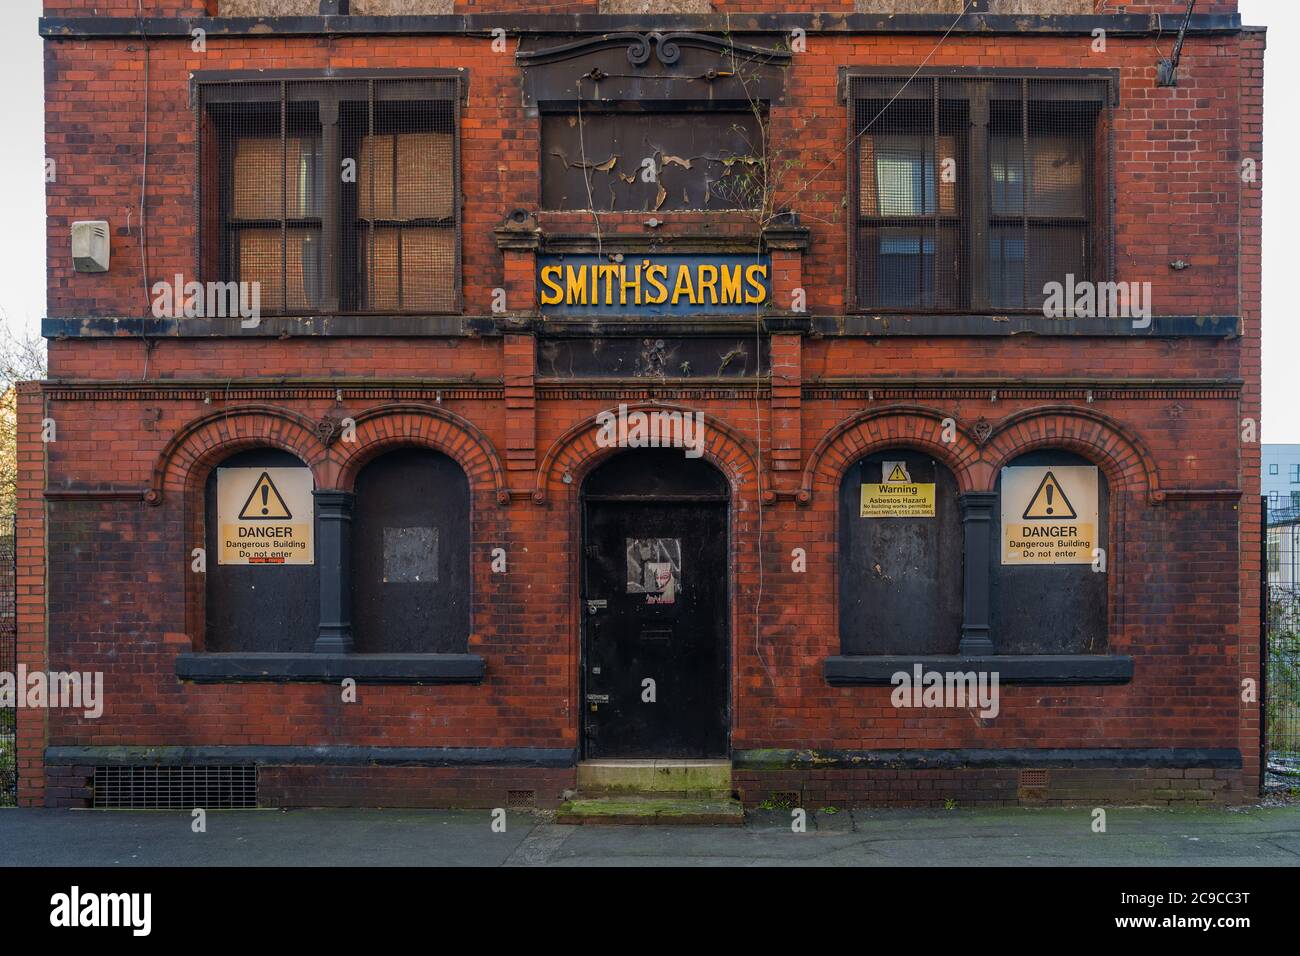 Smith's Arms, Ancoats' oldest pub,  torn down in 2016 to make way for apartments. Built 1775, became pub 1827. Pic taken same year as demolition. Stock Photo